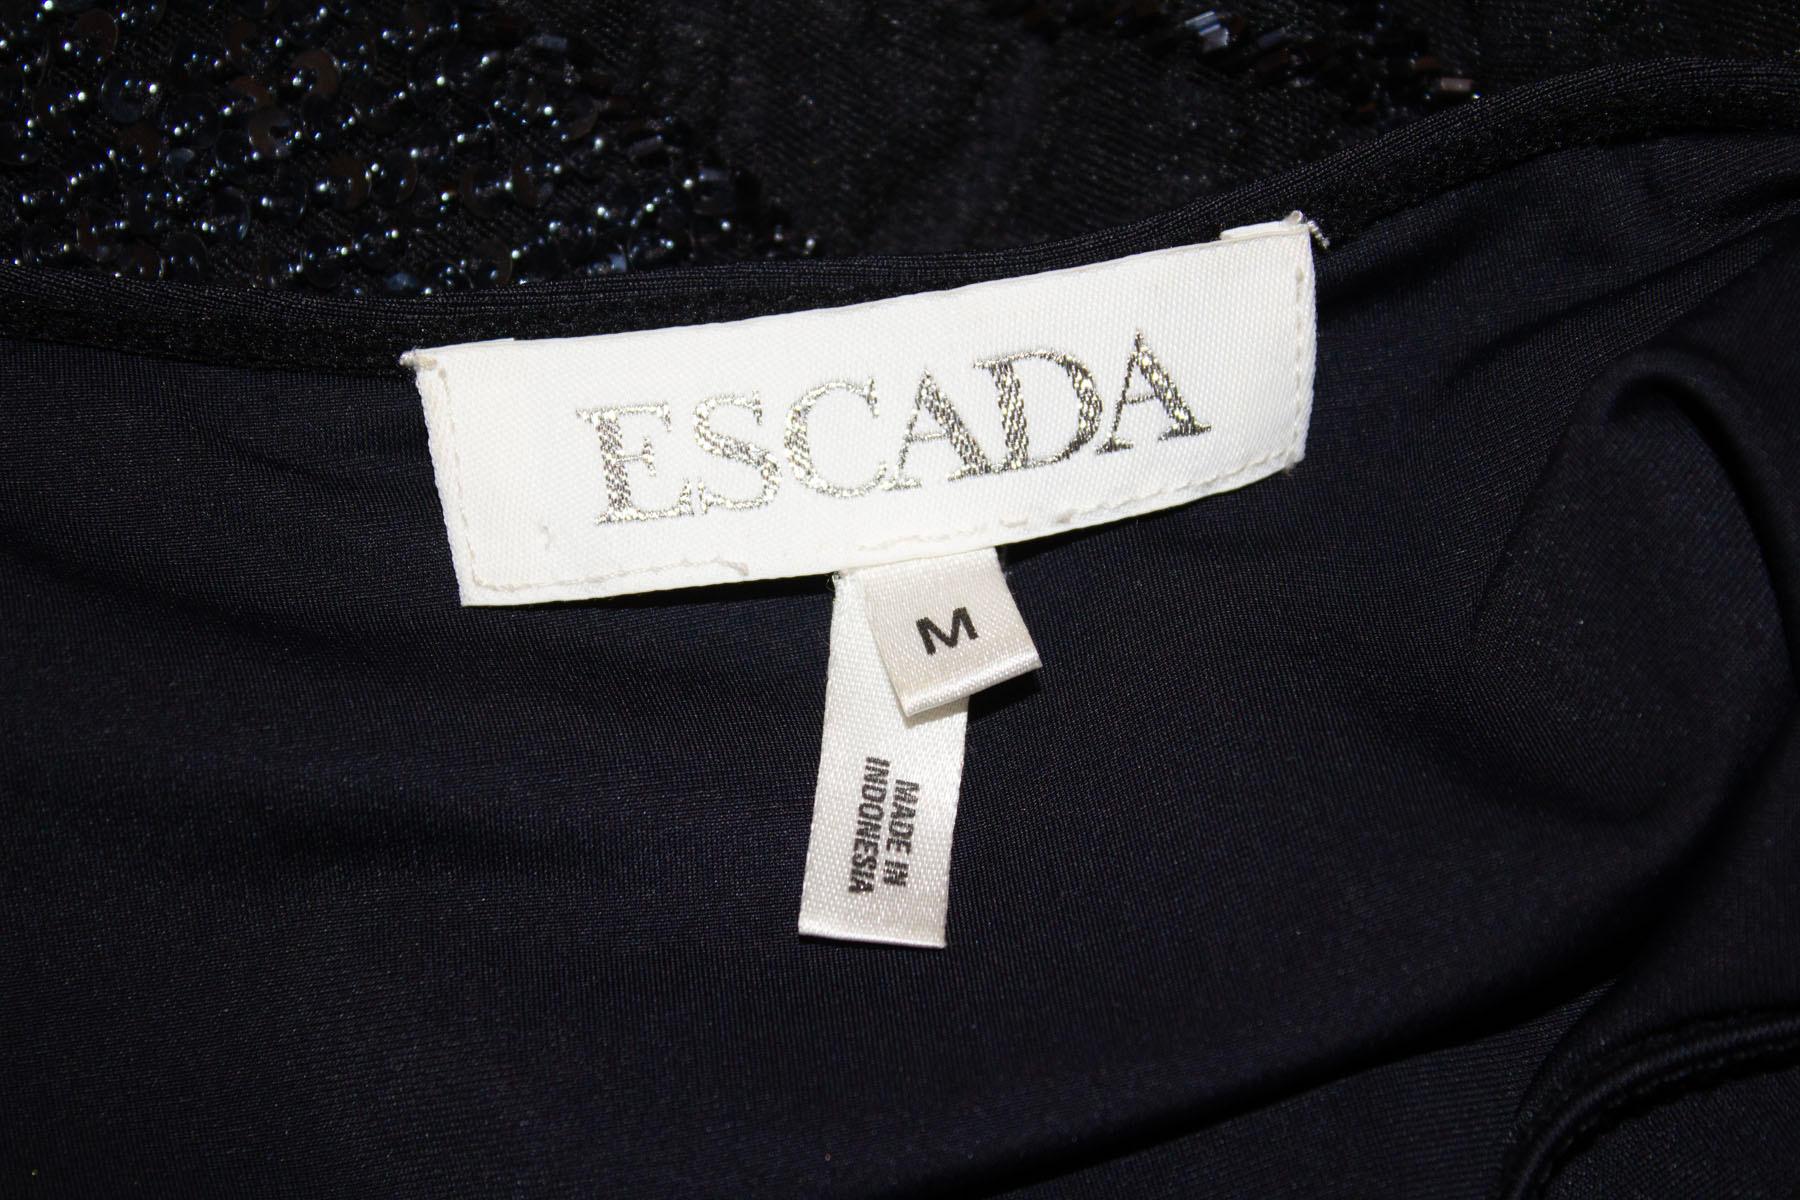 A fun and easy to wear evening top by Escada. The black top has wonderful bead and sequin detail on the front and back on the outer fabric. It has an inner lining fabric and so hangs beautifully. Size M Measurements; Bust up to 40'', length 22''